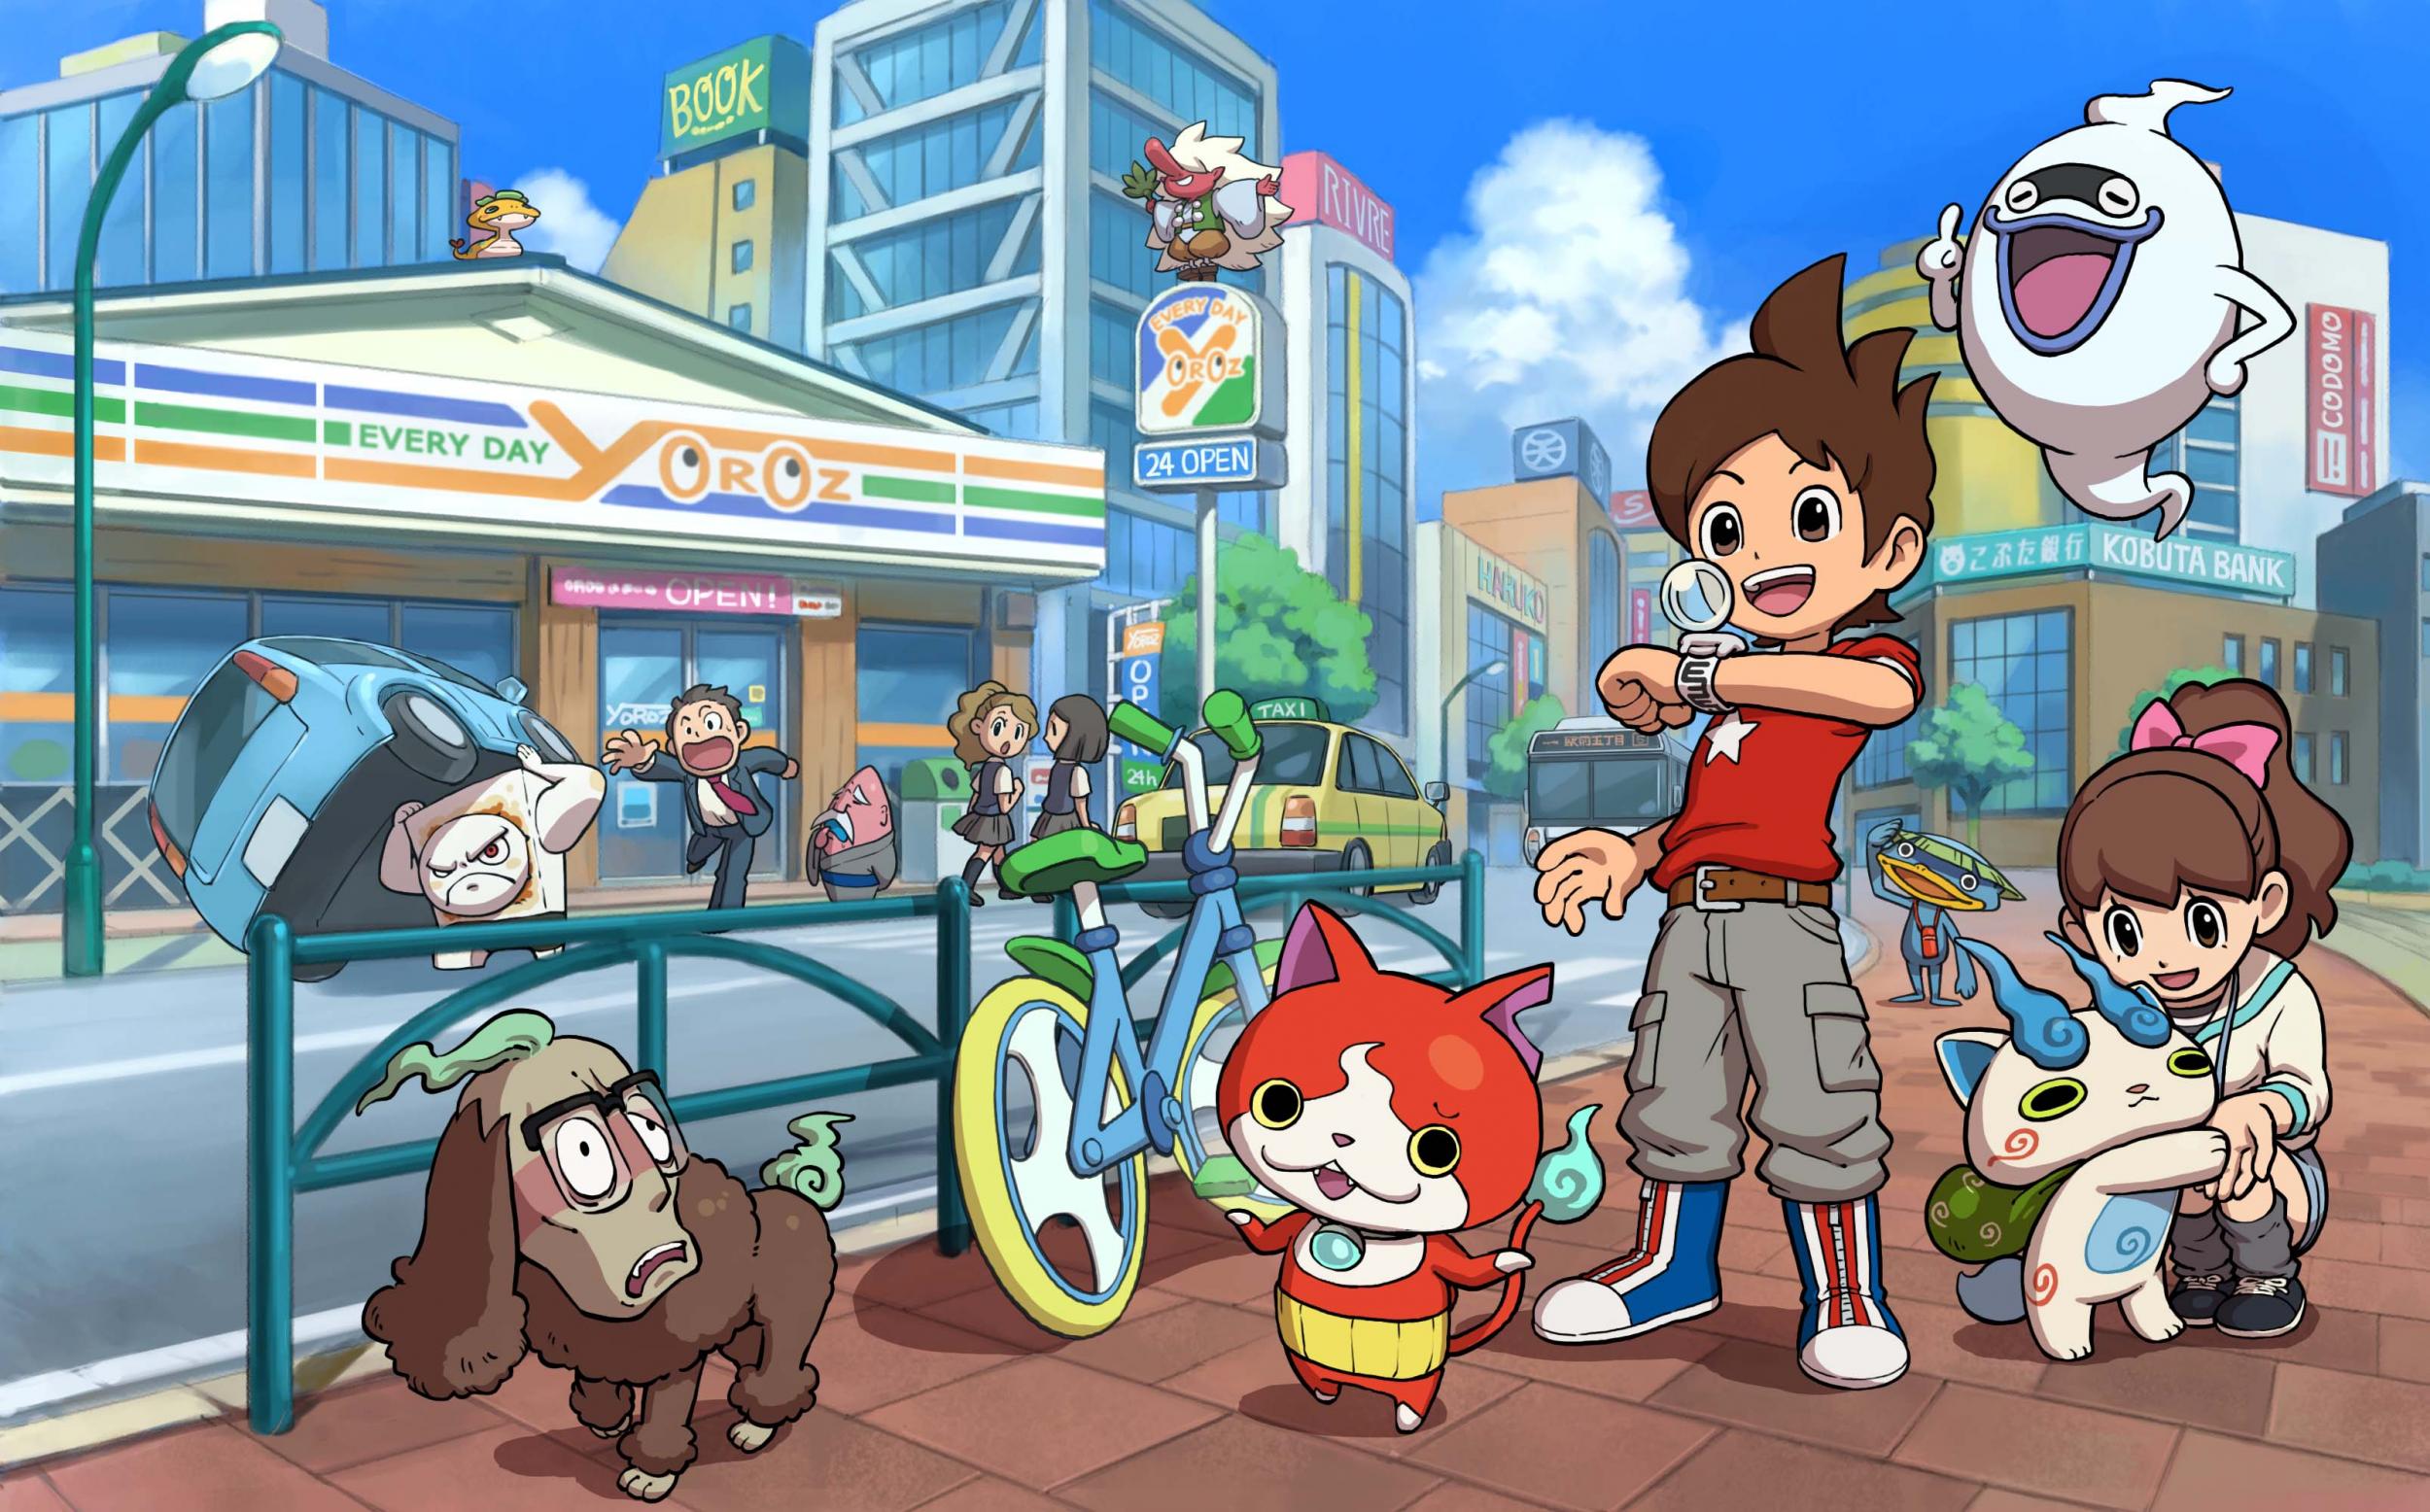 Yo-kai Watch is snappier and cheekier than Pokemon but too simplistic for older gamers